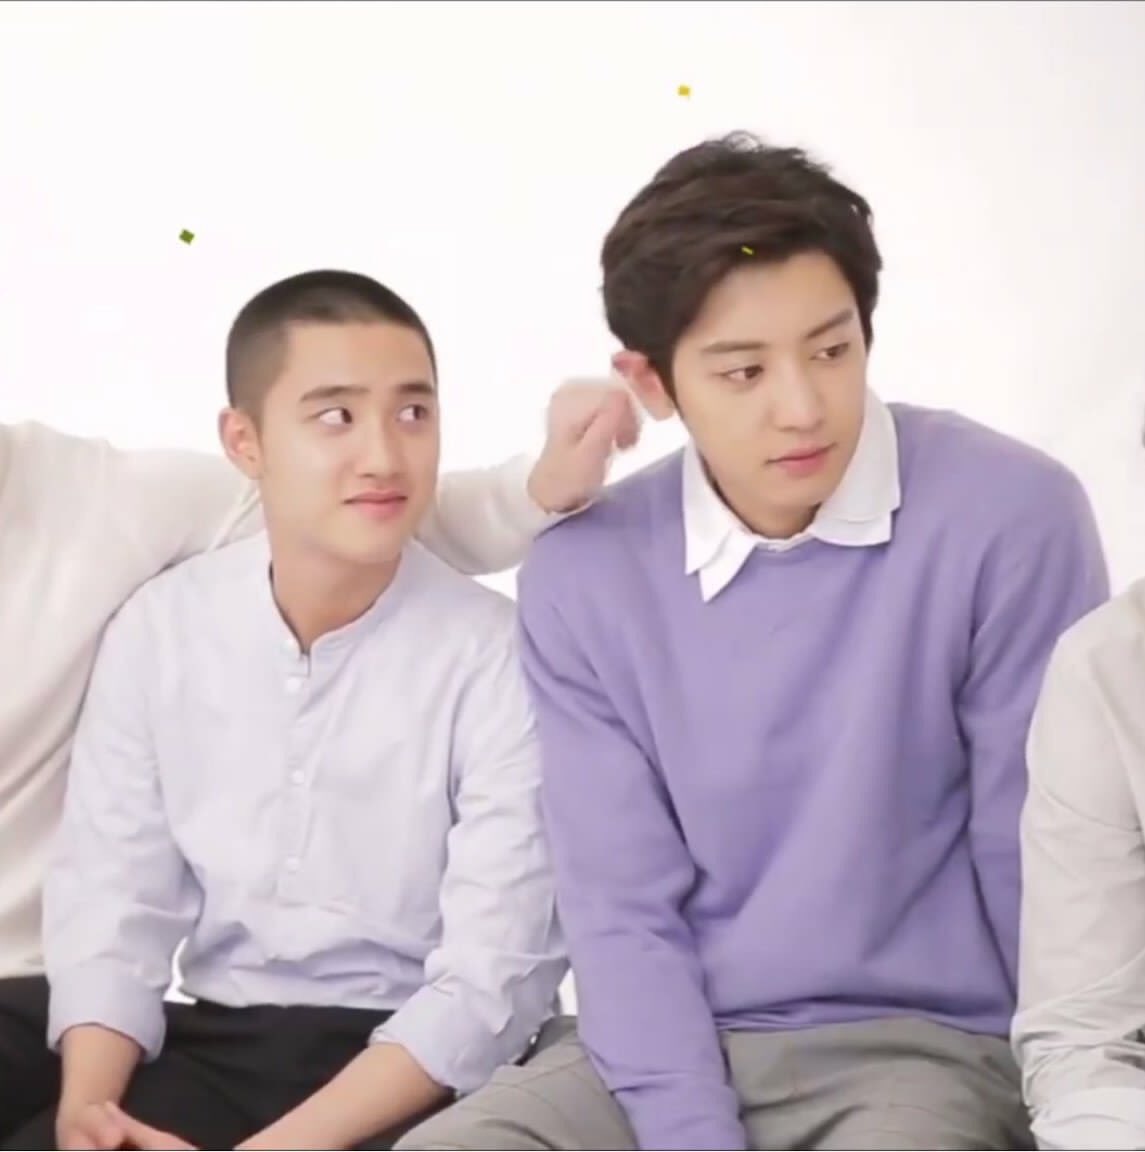 lol when kyungsoo was teaching chanyeol how to tap dance he wasn’t even looking at his feet he waS DEADASS STARING AT CHANYEOL’S FACE THE WHOLE TIME AND HE LOOKED LIKE A PROUD BOYFRIEND WHEN CHANYEOL FINALLY GOT THE STEPS CORRECTLY